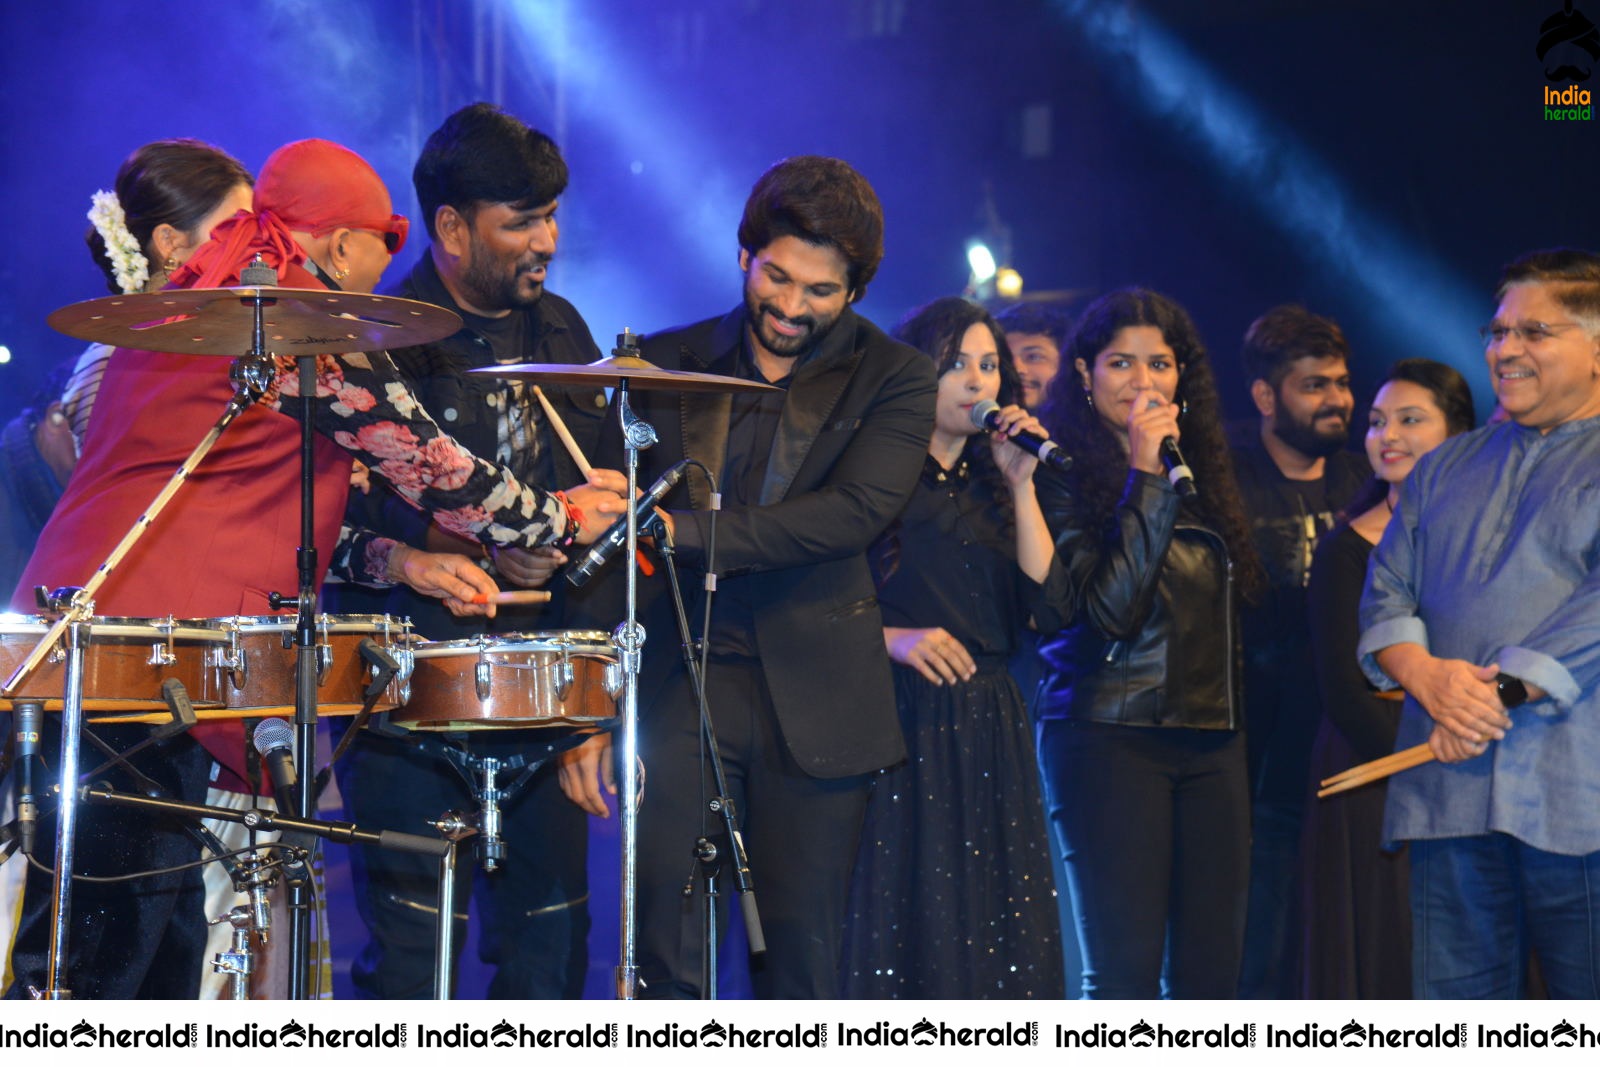 When Pooja Hegde started playing drums along with Sivamani Set 2